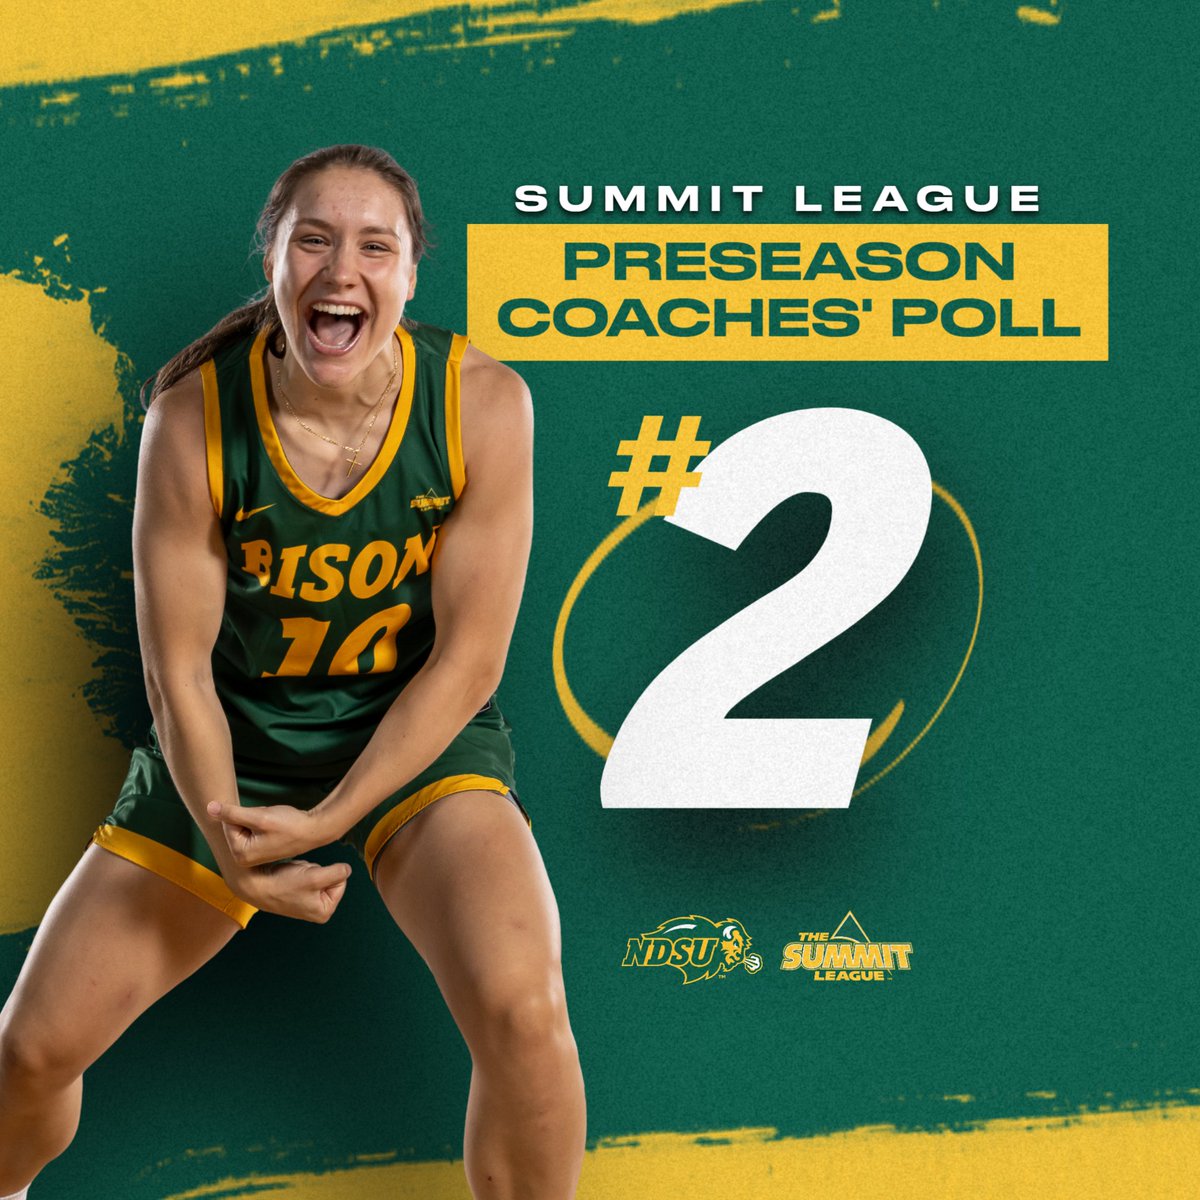 Checking in with our 𝗵𝗶𝗴𝗵𝗲𝘀𝘁 preseason ranking since joining @TheSummitLeague 📈